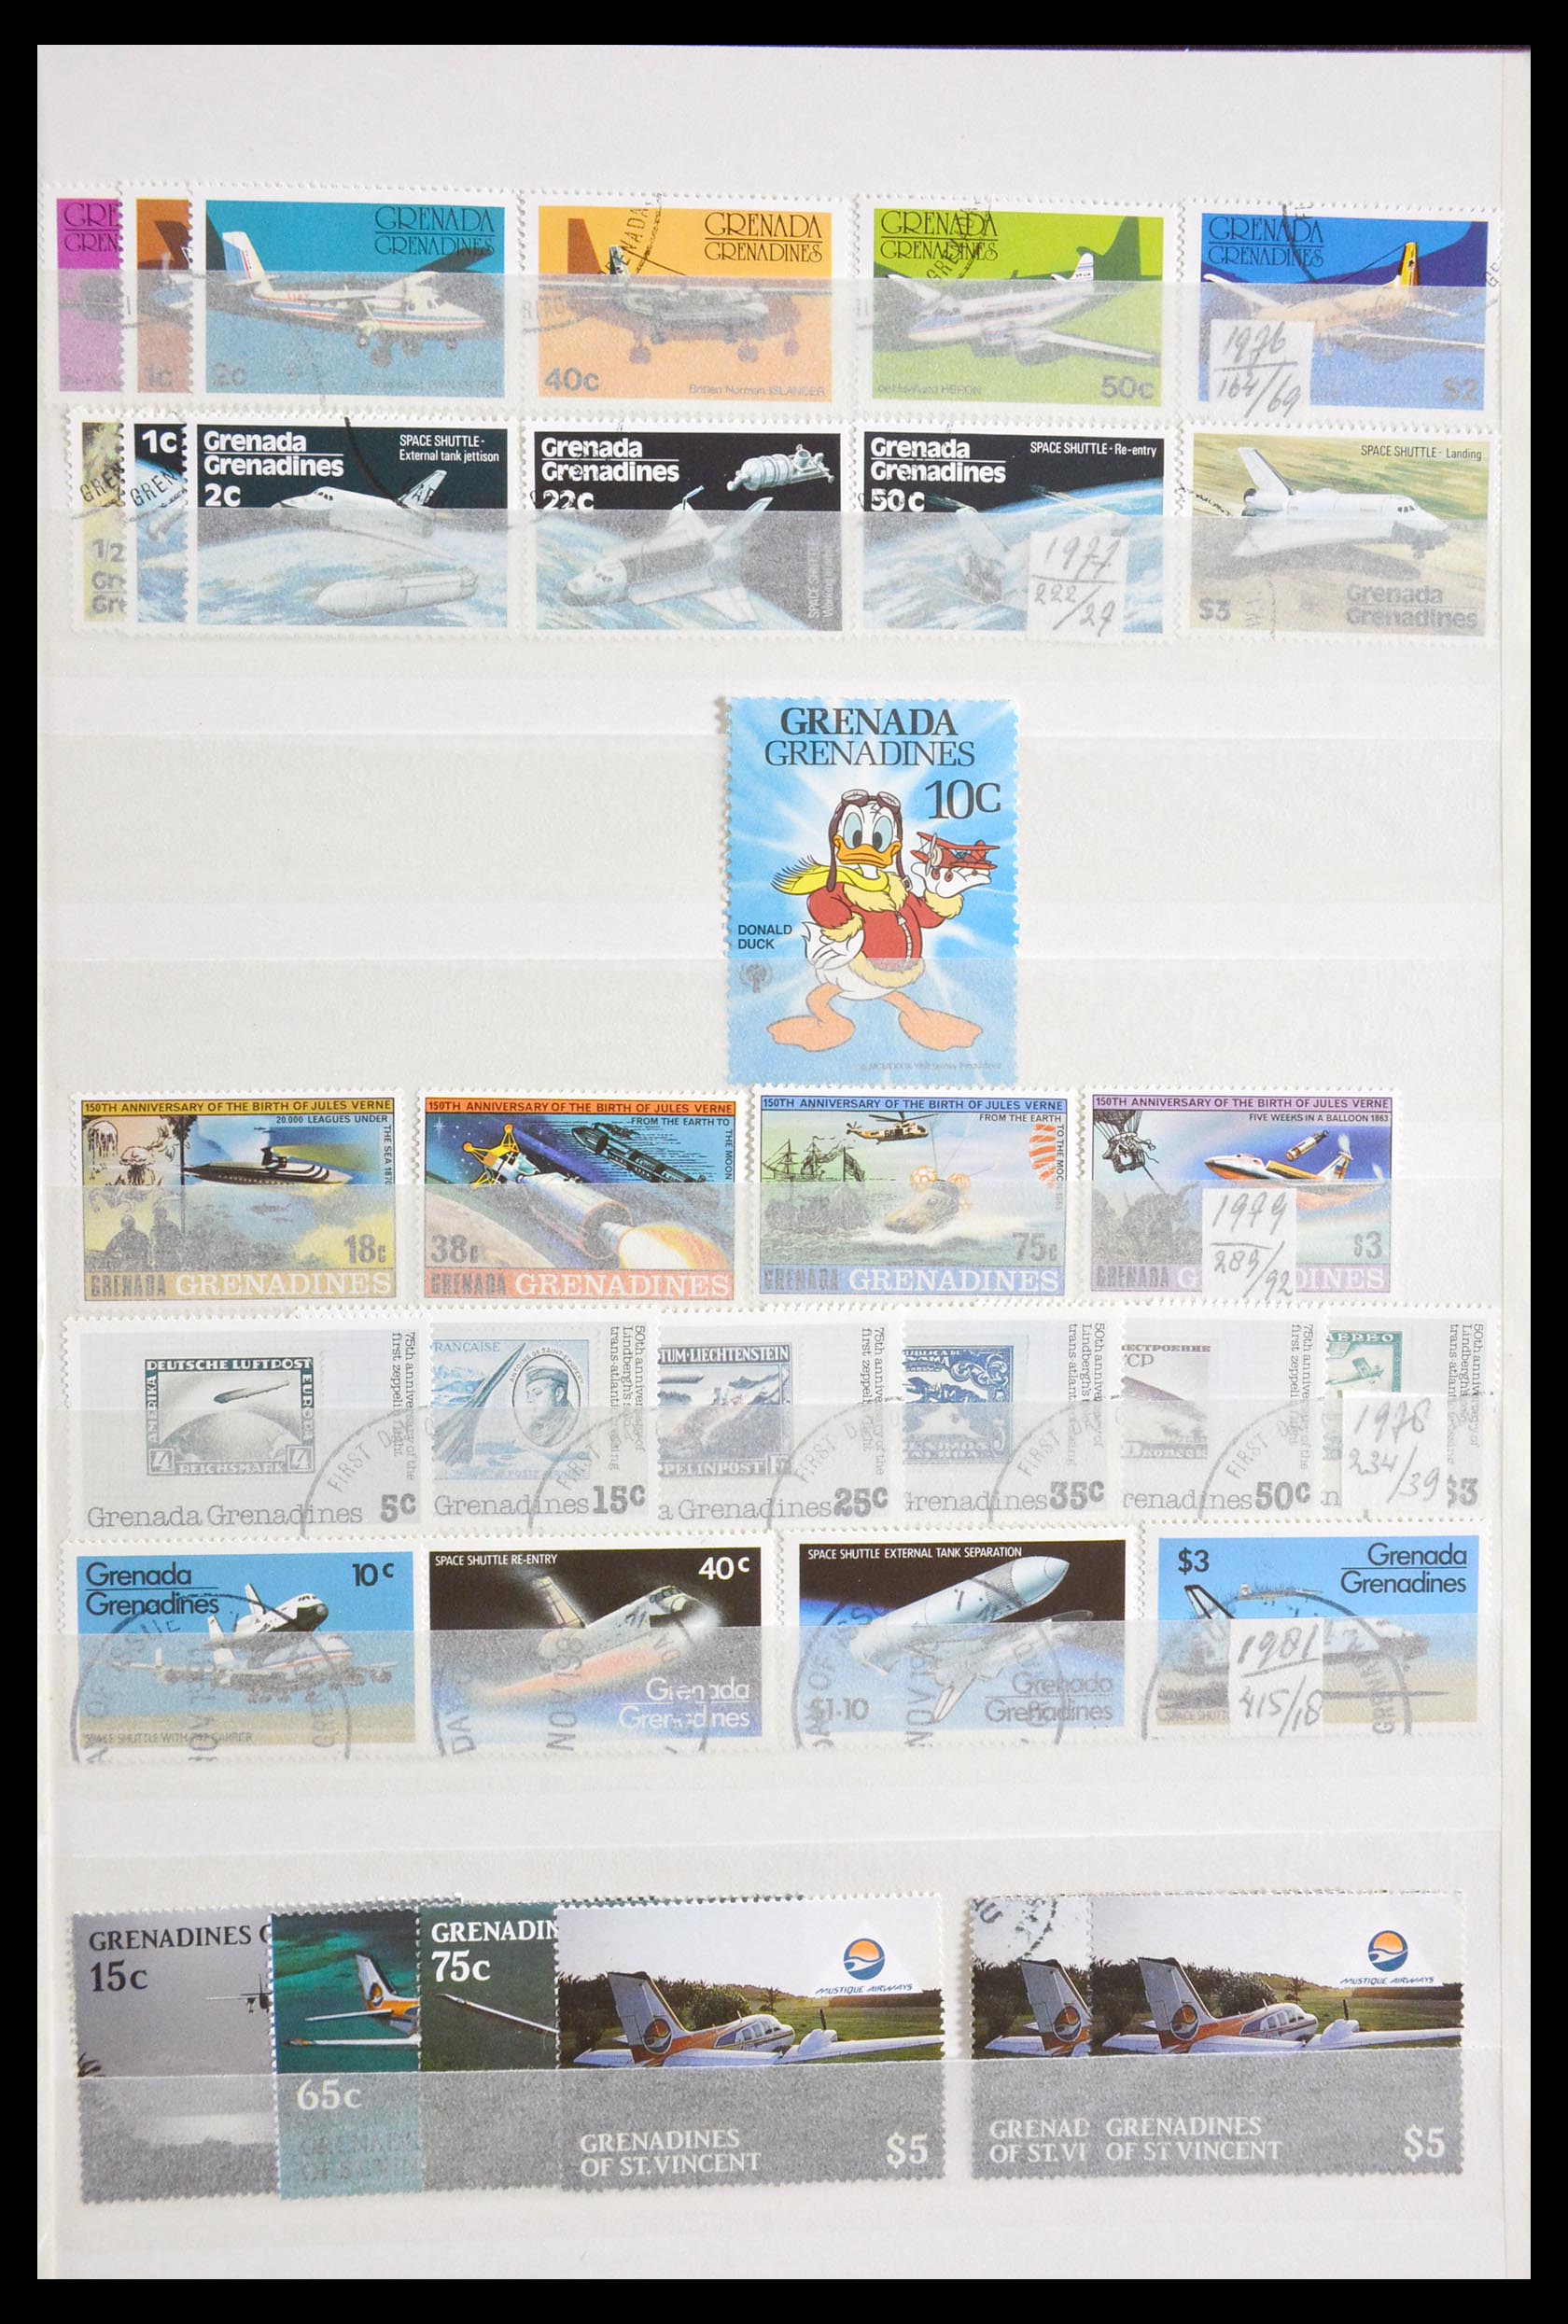 29917 063 - 29917 Latin America airmail stamps.